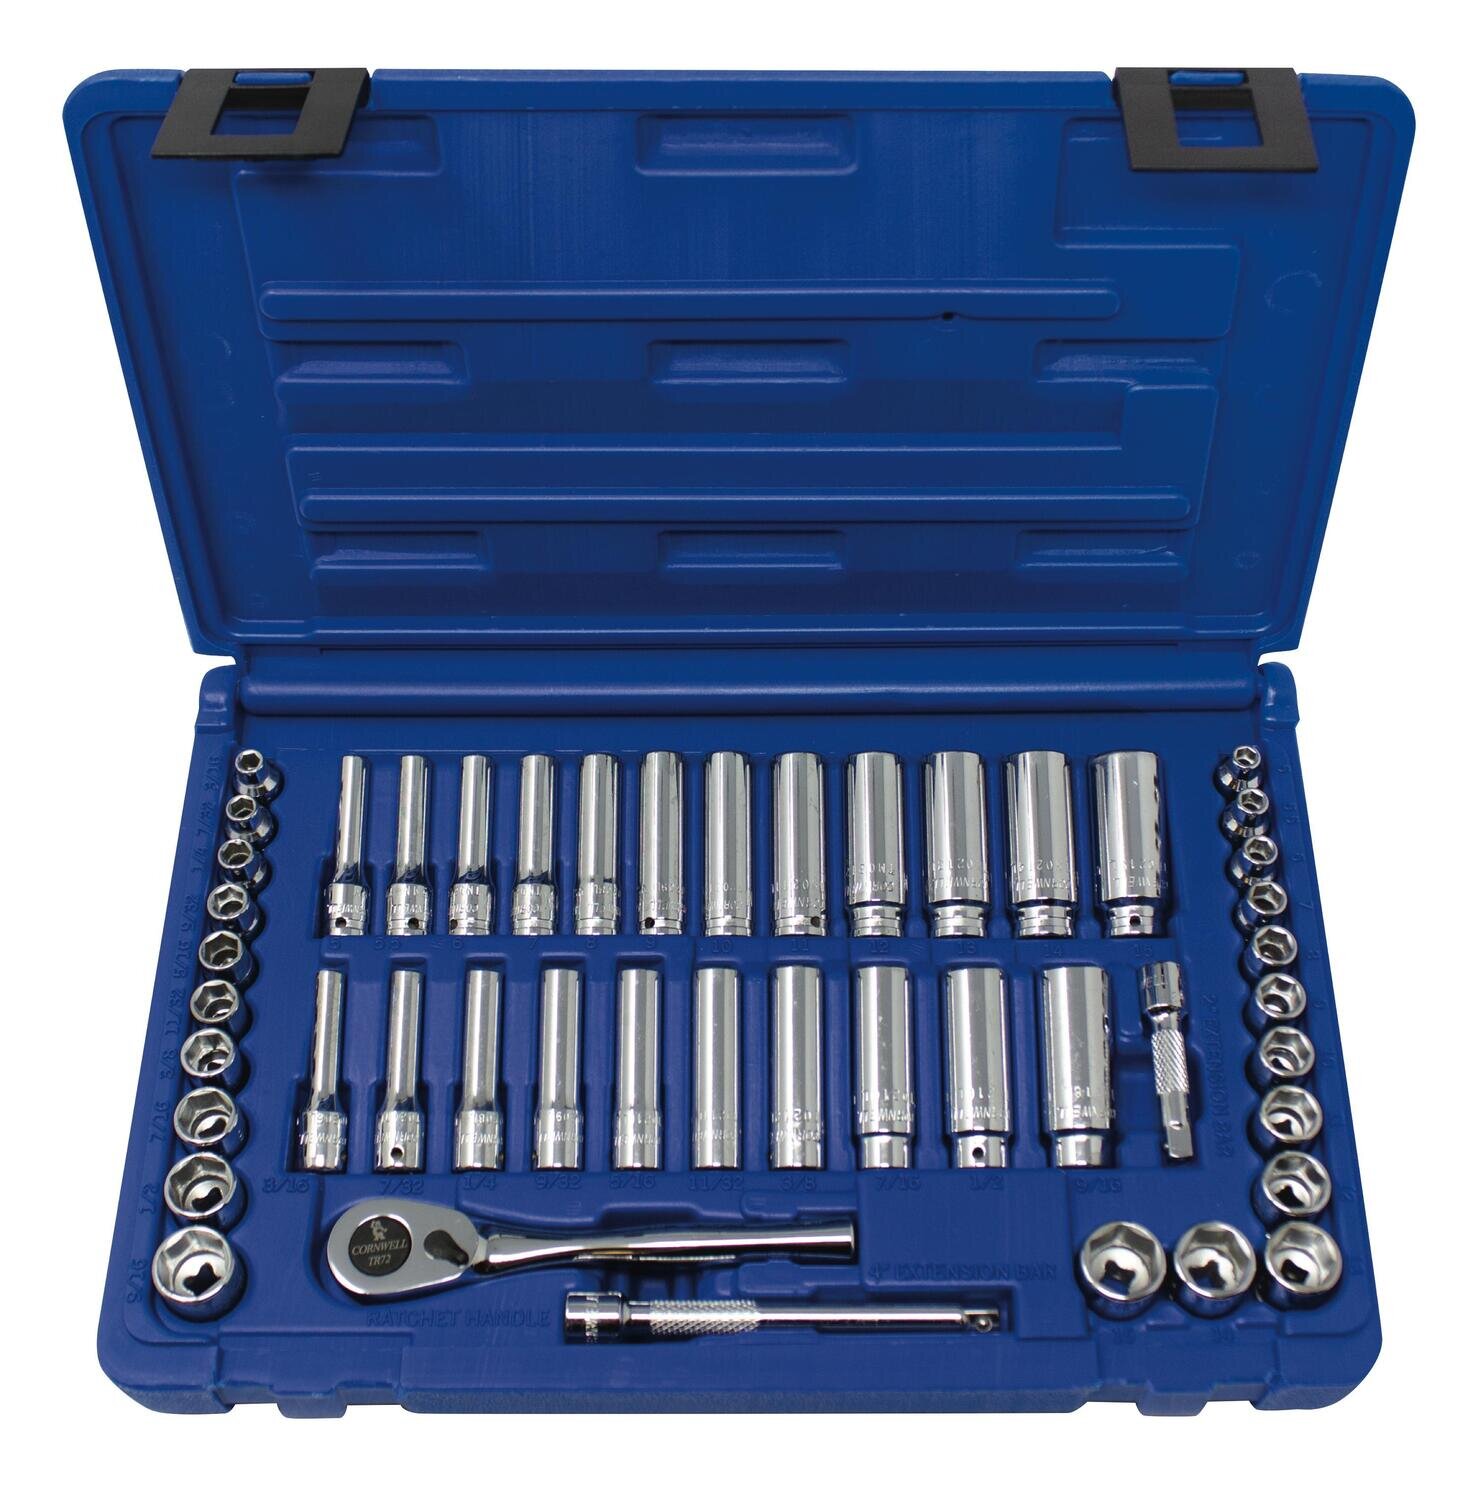 TS047SSFT - 47 Piece 1/4” Drive Super Set, 6 Point with Fine Tooth Ratchet